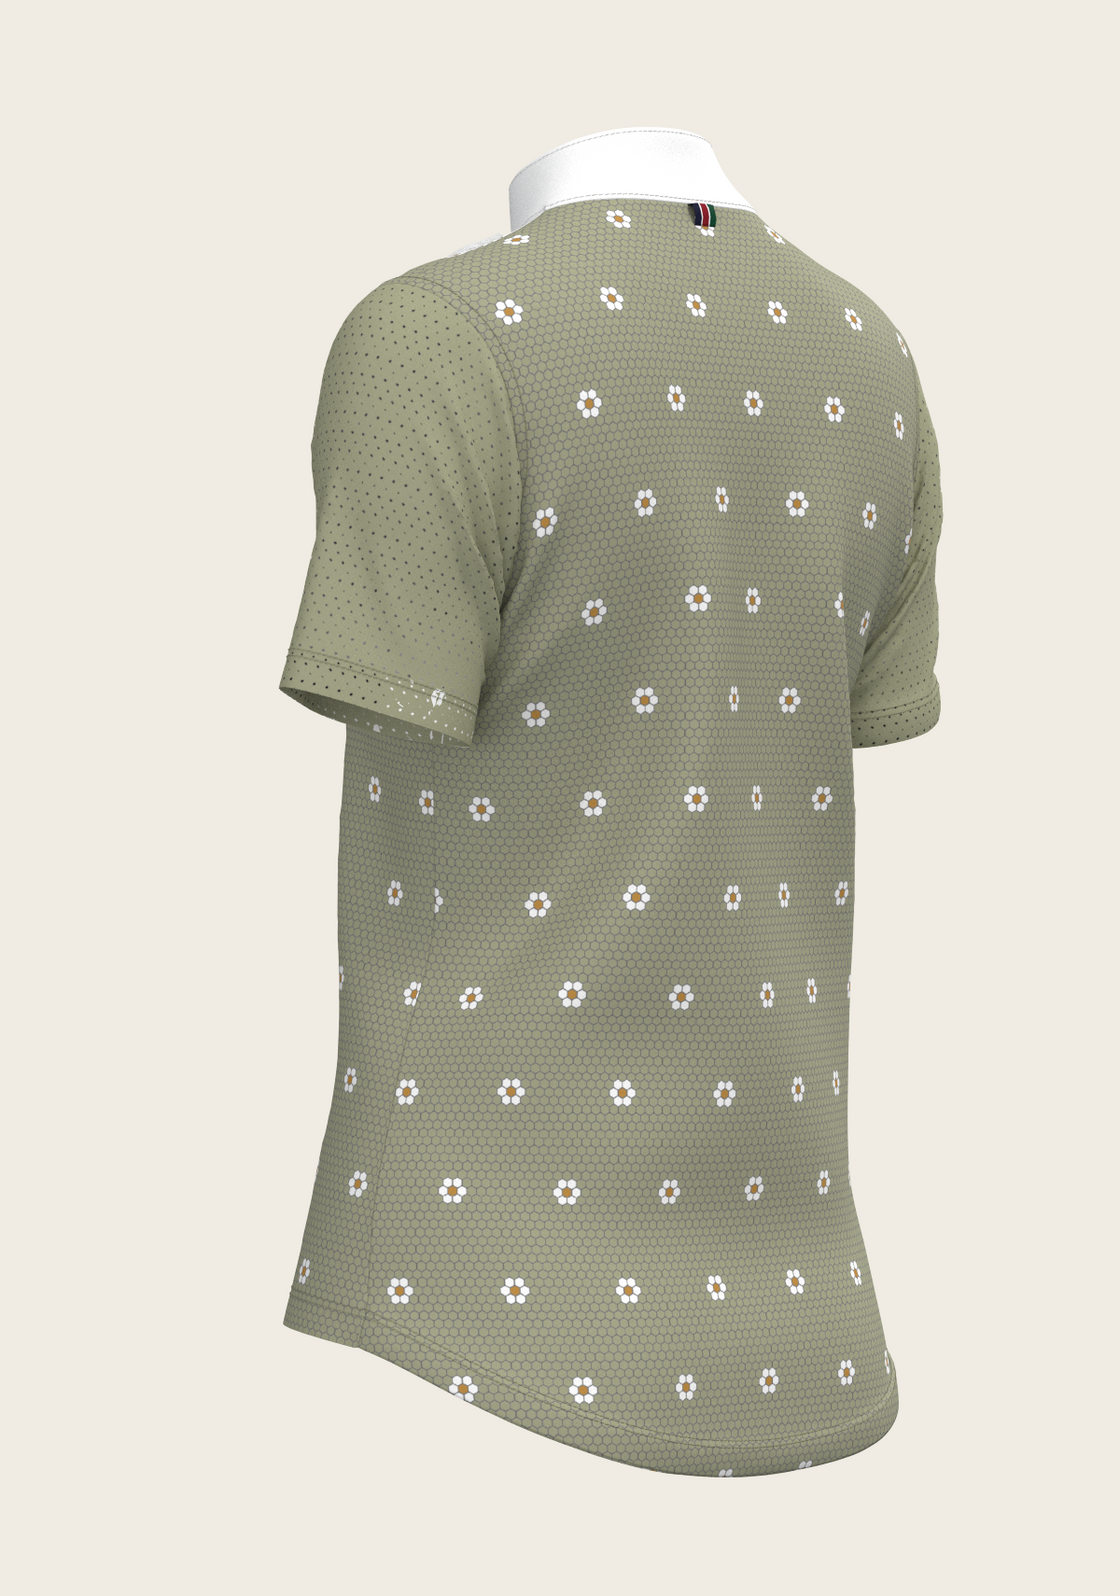 Mosaic Daises in Olive Short Pleated Short Sleeve Show Shirt